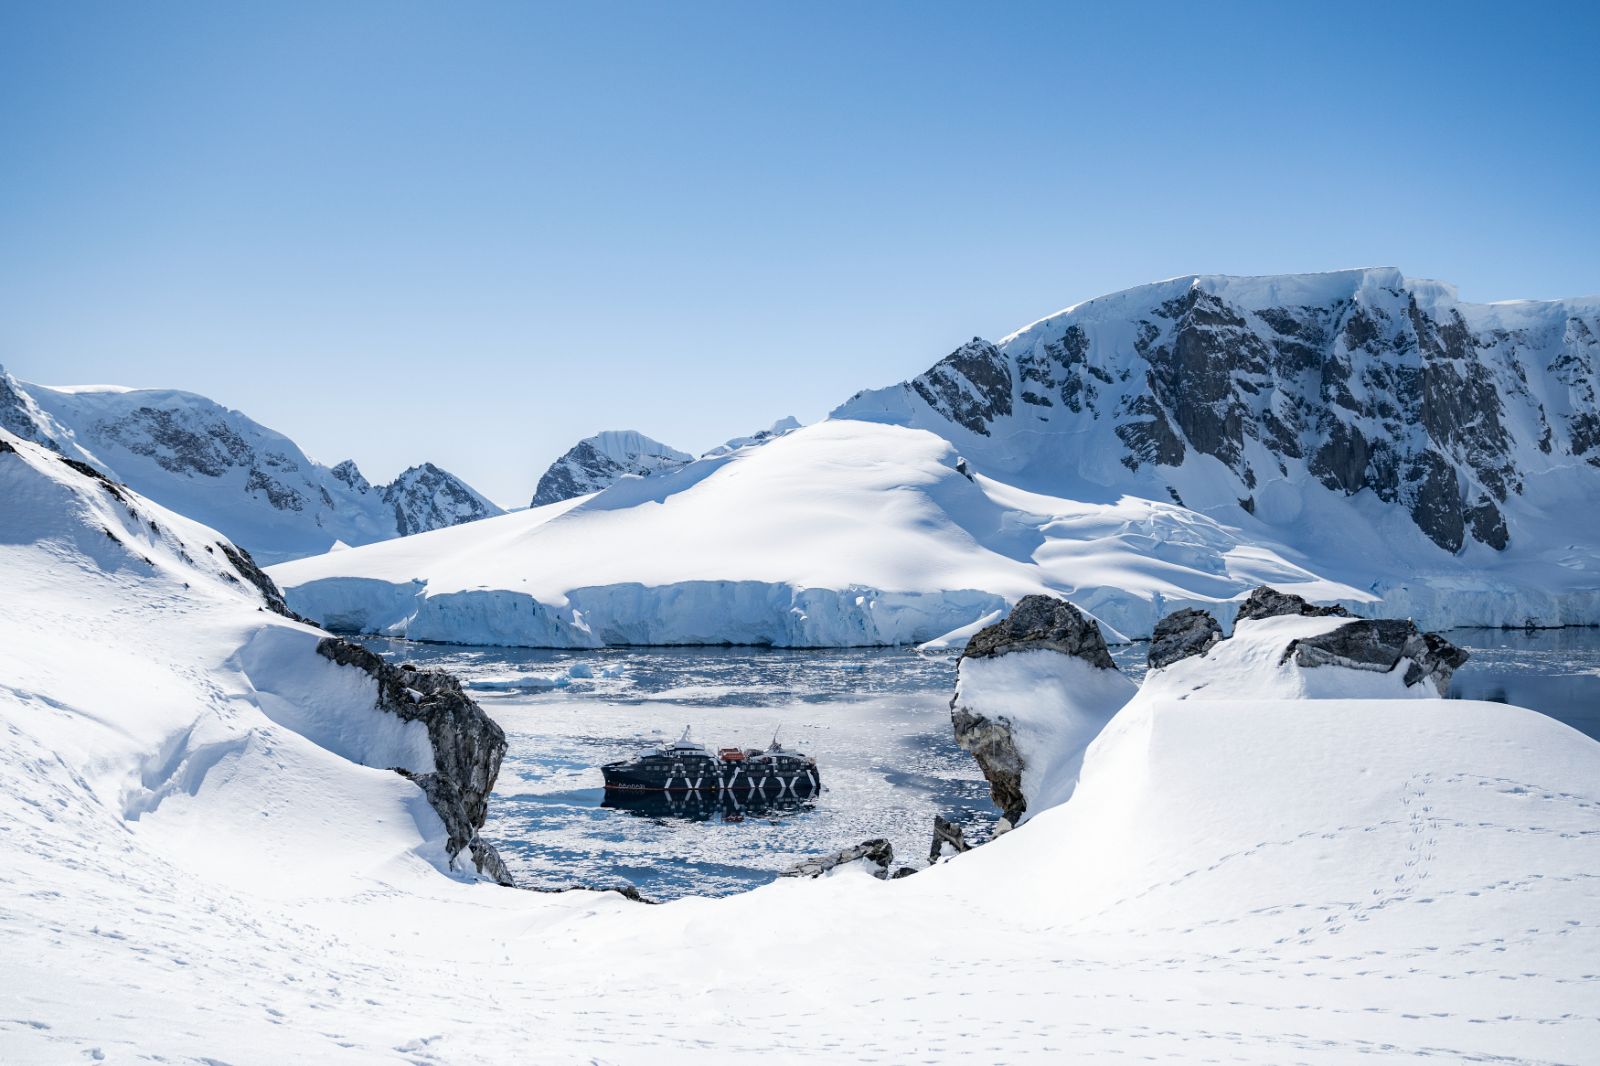 Distant view of the Magellan Explorer in Antarctica surrounded by snowy landscapes